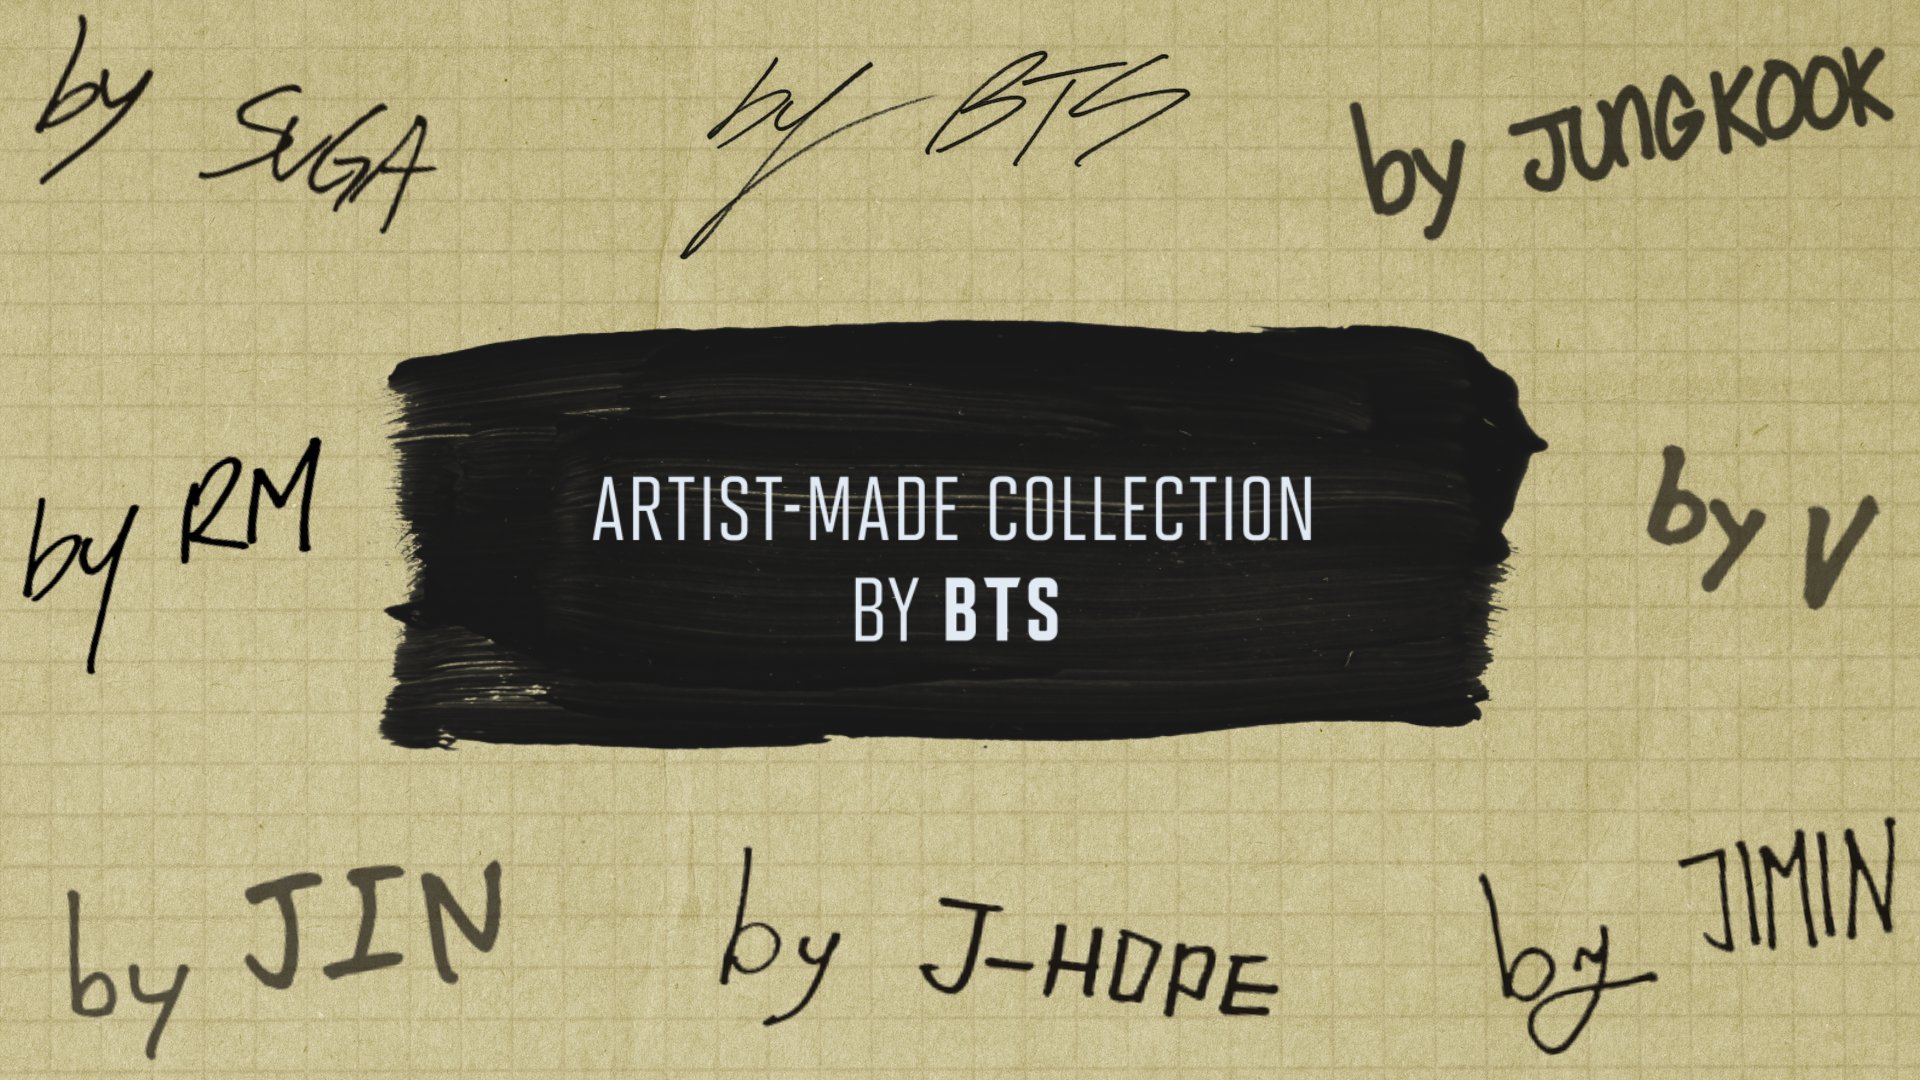 BTS: Not Just A Famous Music Artists But Also A Great Artisans in 2022
